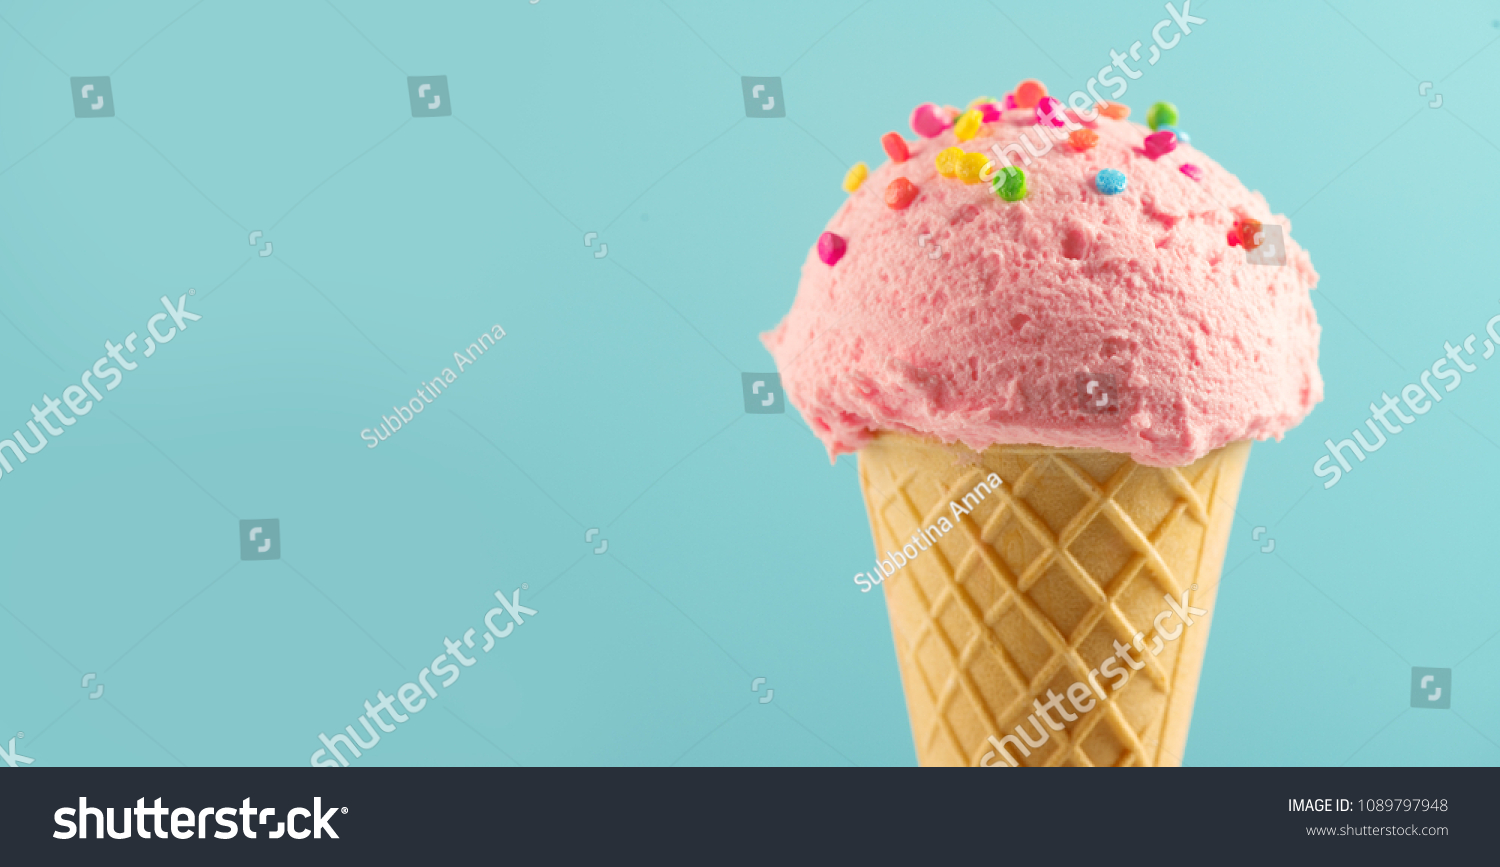 Ice cream cone close-up. Pink Icecream scoop in waffle cone over blue background. Strawberry or raspberry flavor Sweet dessert decorated with colorful sprinkles, closeup #1089797948